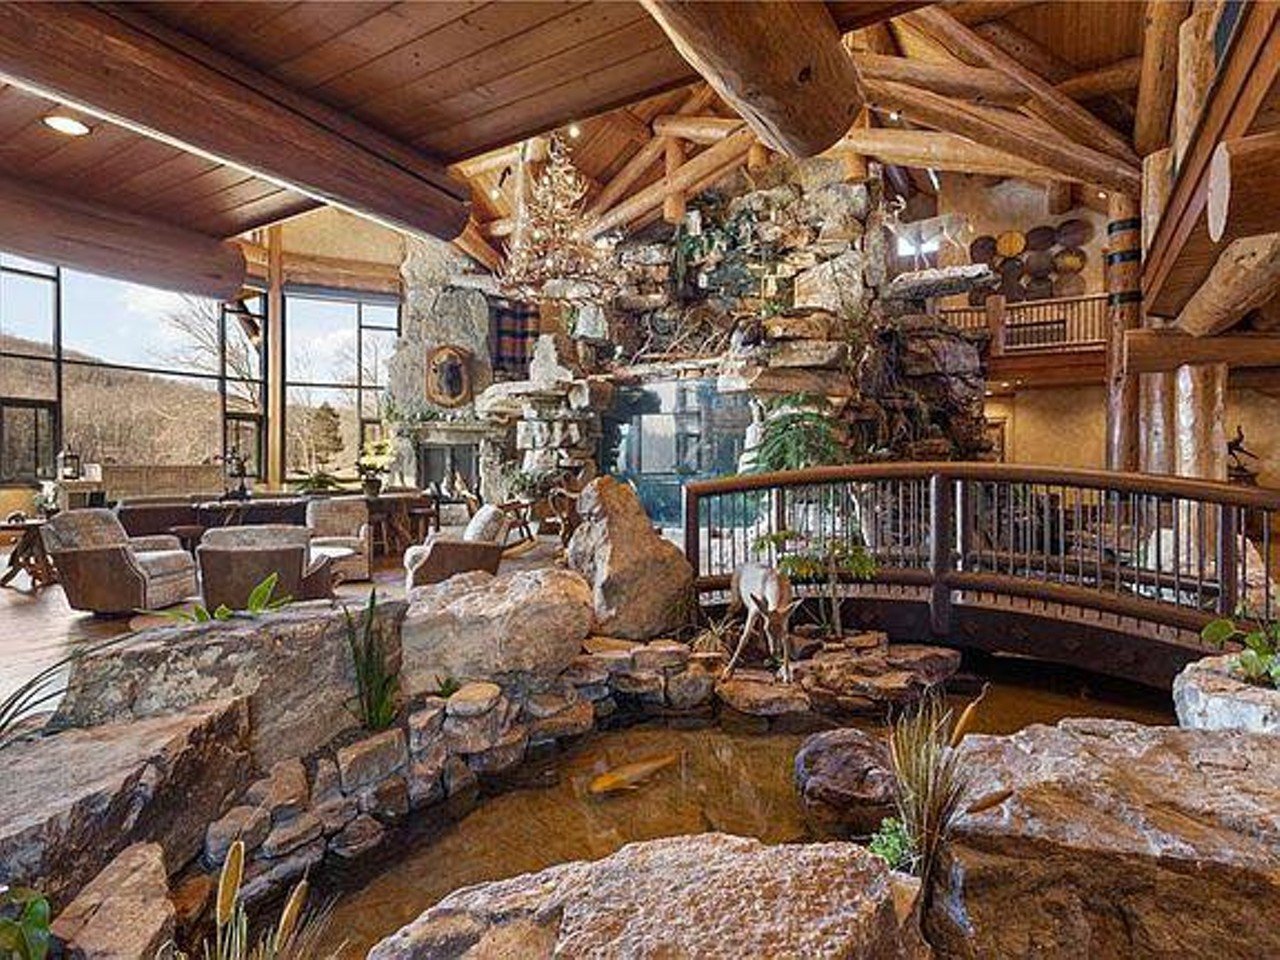 Nascar's Tony Stewart's Indiana Home Resembling A Bass Pro Shop Is Now Listed For $30 Million